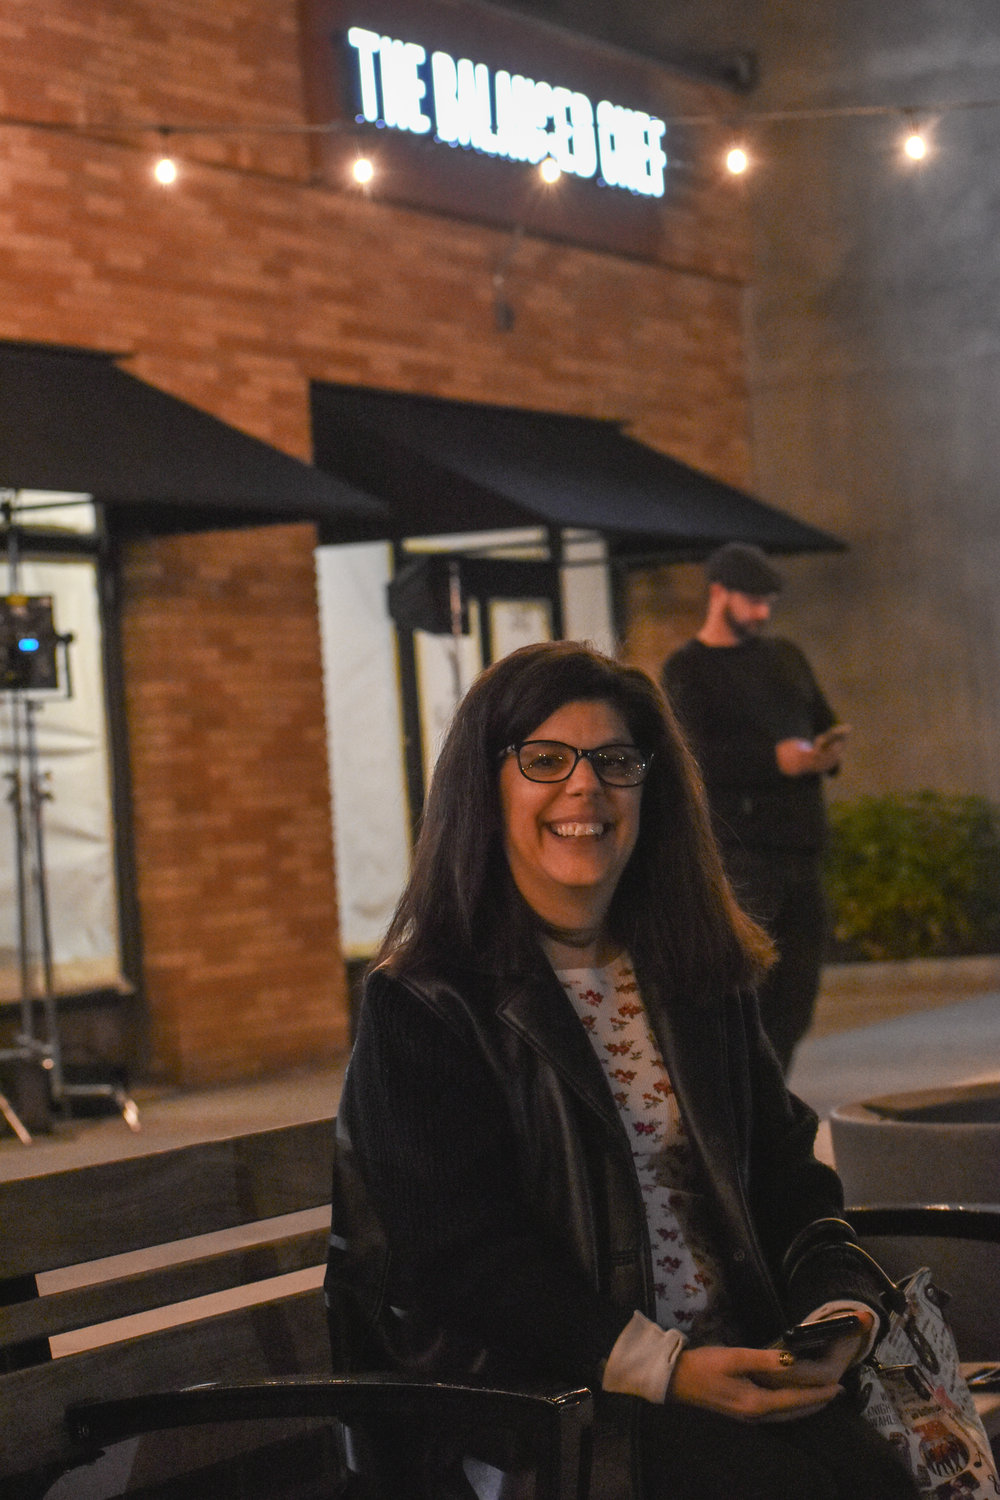 Food Network and Robert Irvine fan Jeanna Simonette patiently waits outside The Balanced Chef as production of Irvine's T.V. show "Restaurant: Impossible" takes place.